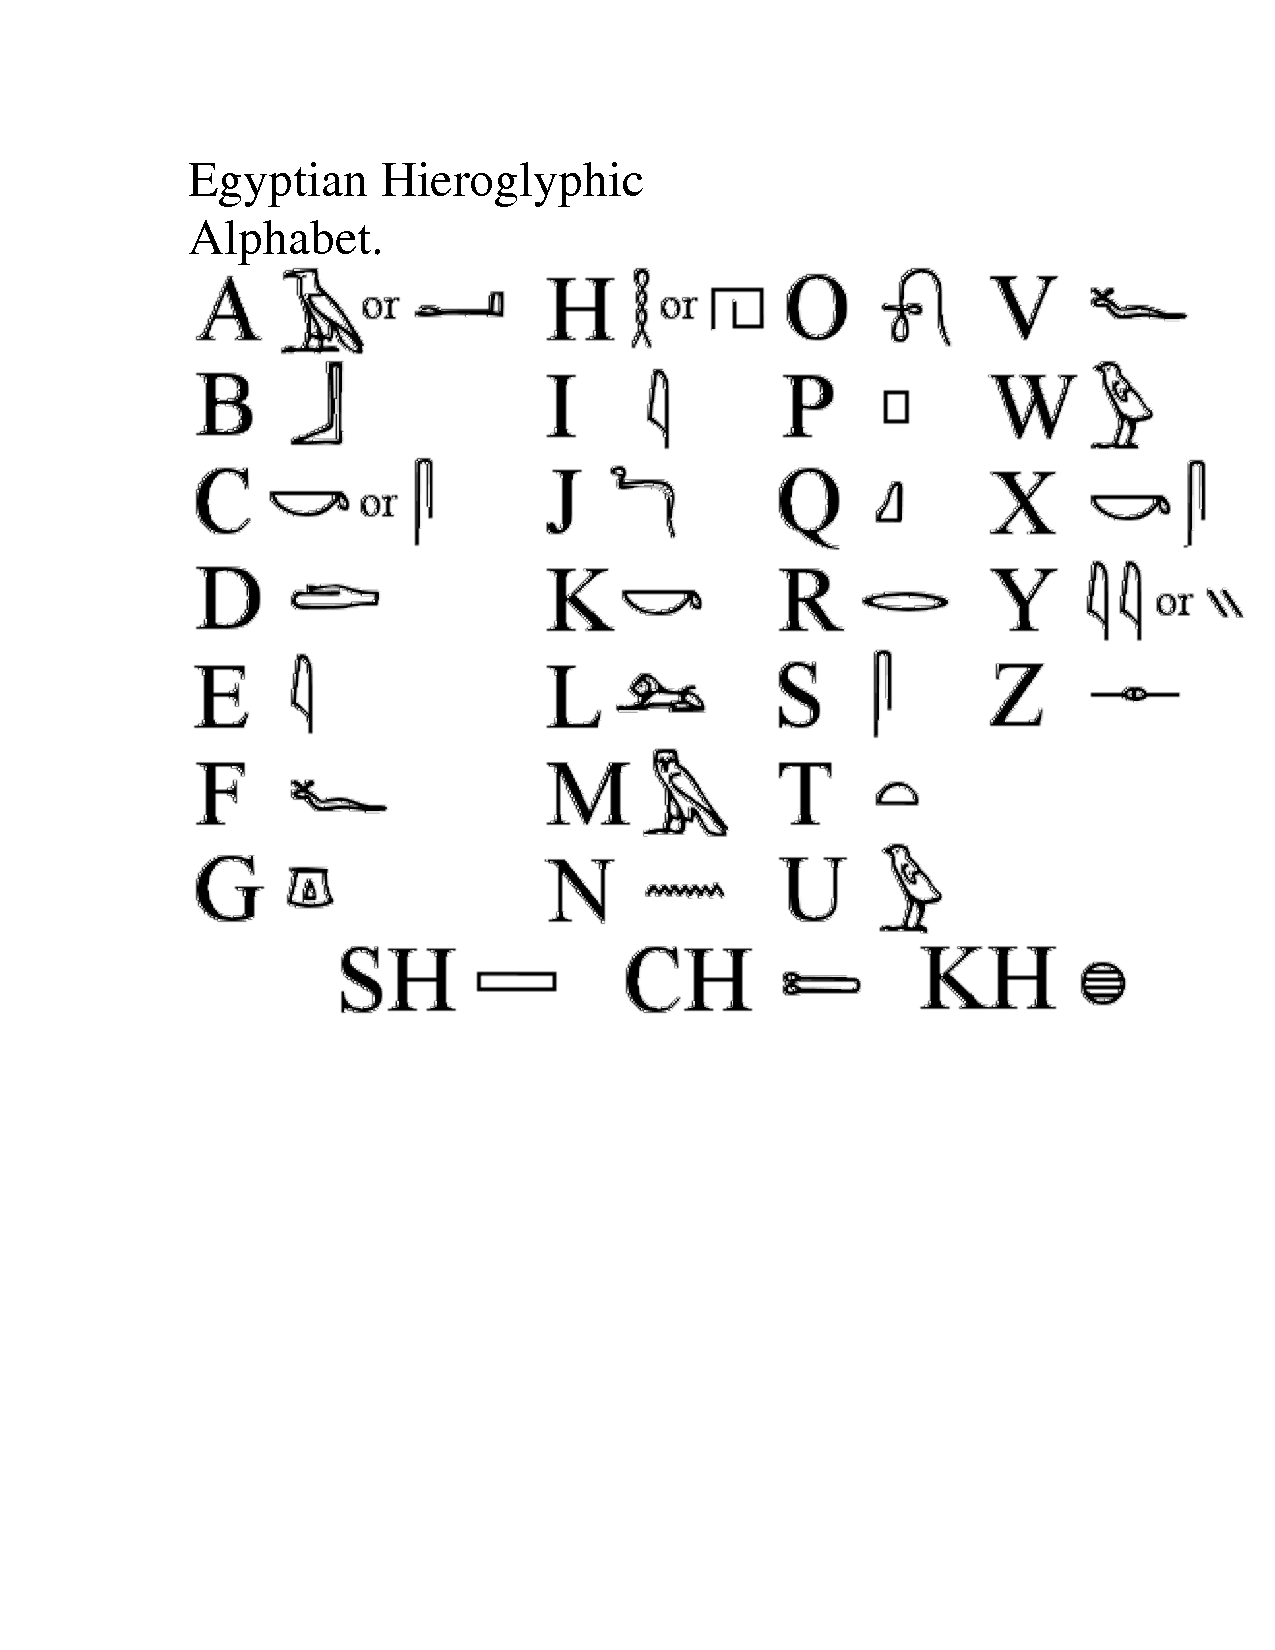 10-best-images-of-hieroglyphic-writing-in-pictures-worksheet-egyptian